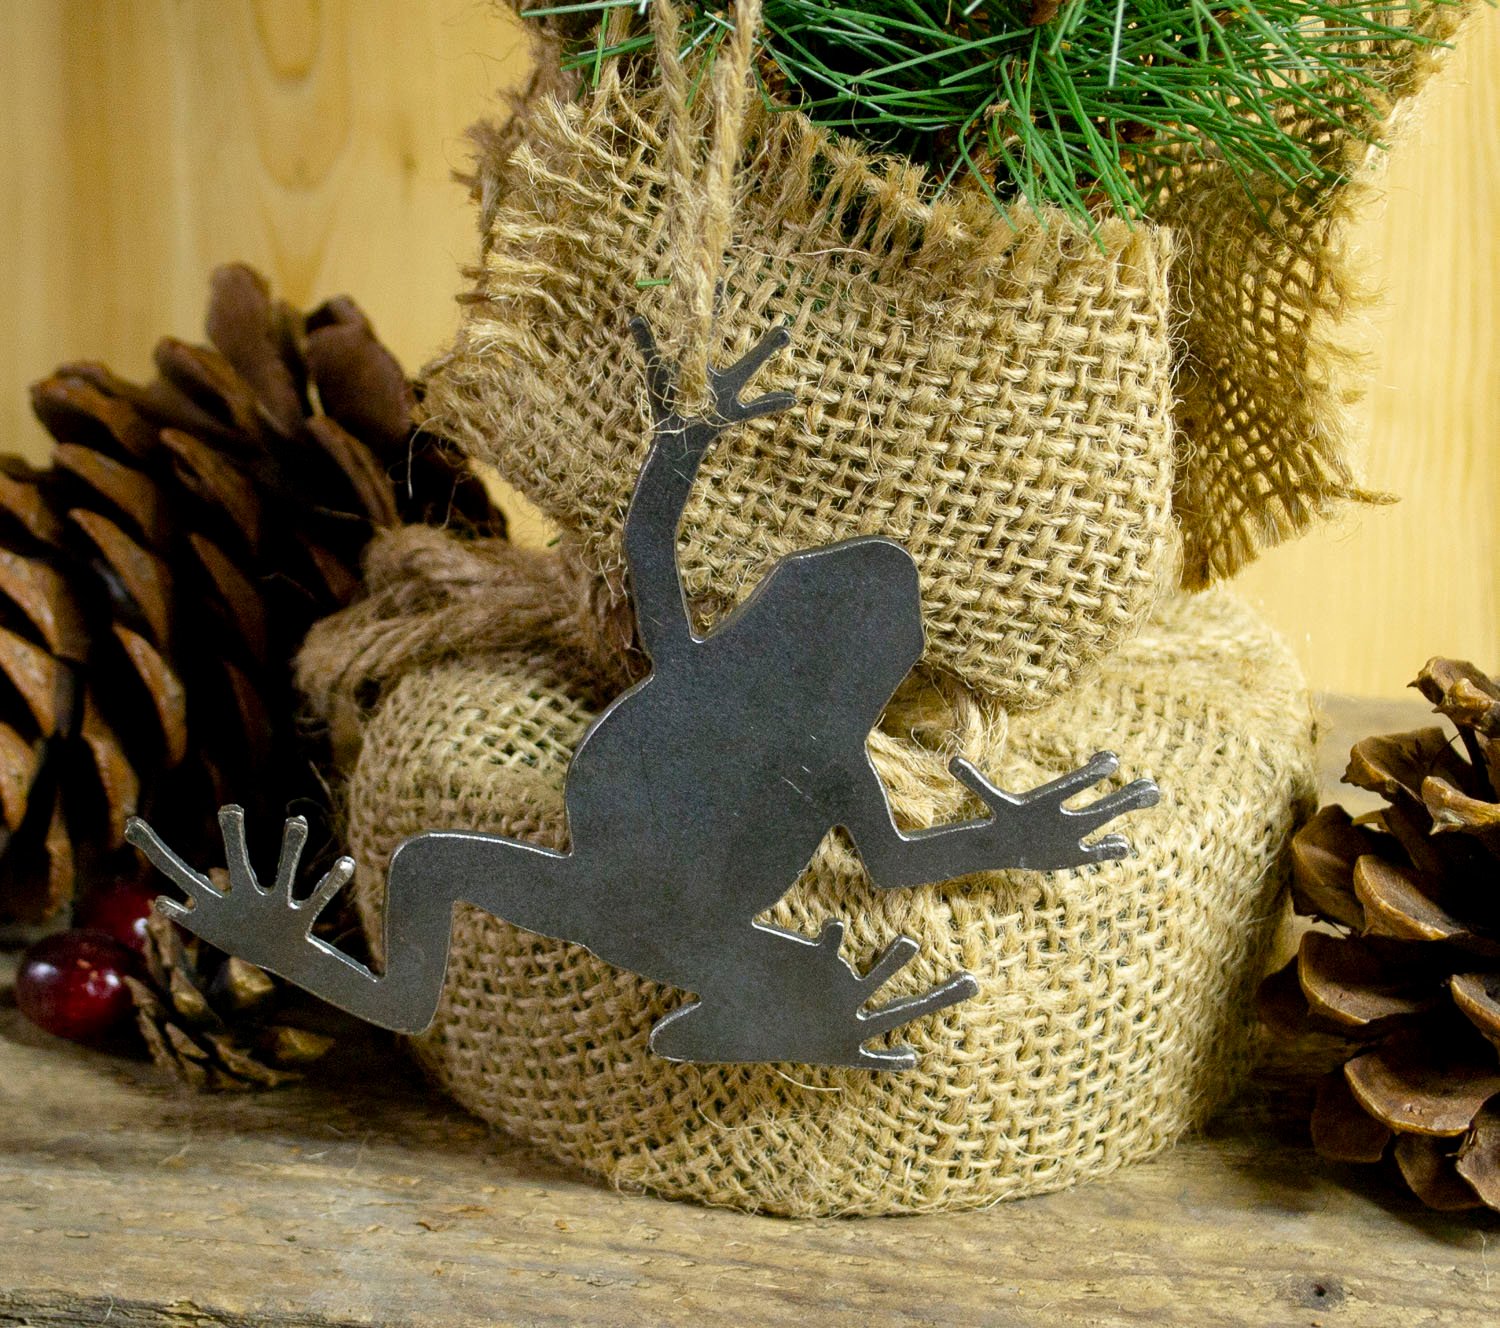 Frog Metal Christmas Tree Ornament Holiday Decoration Raw Steel Gift Recycled Nature Home Decor